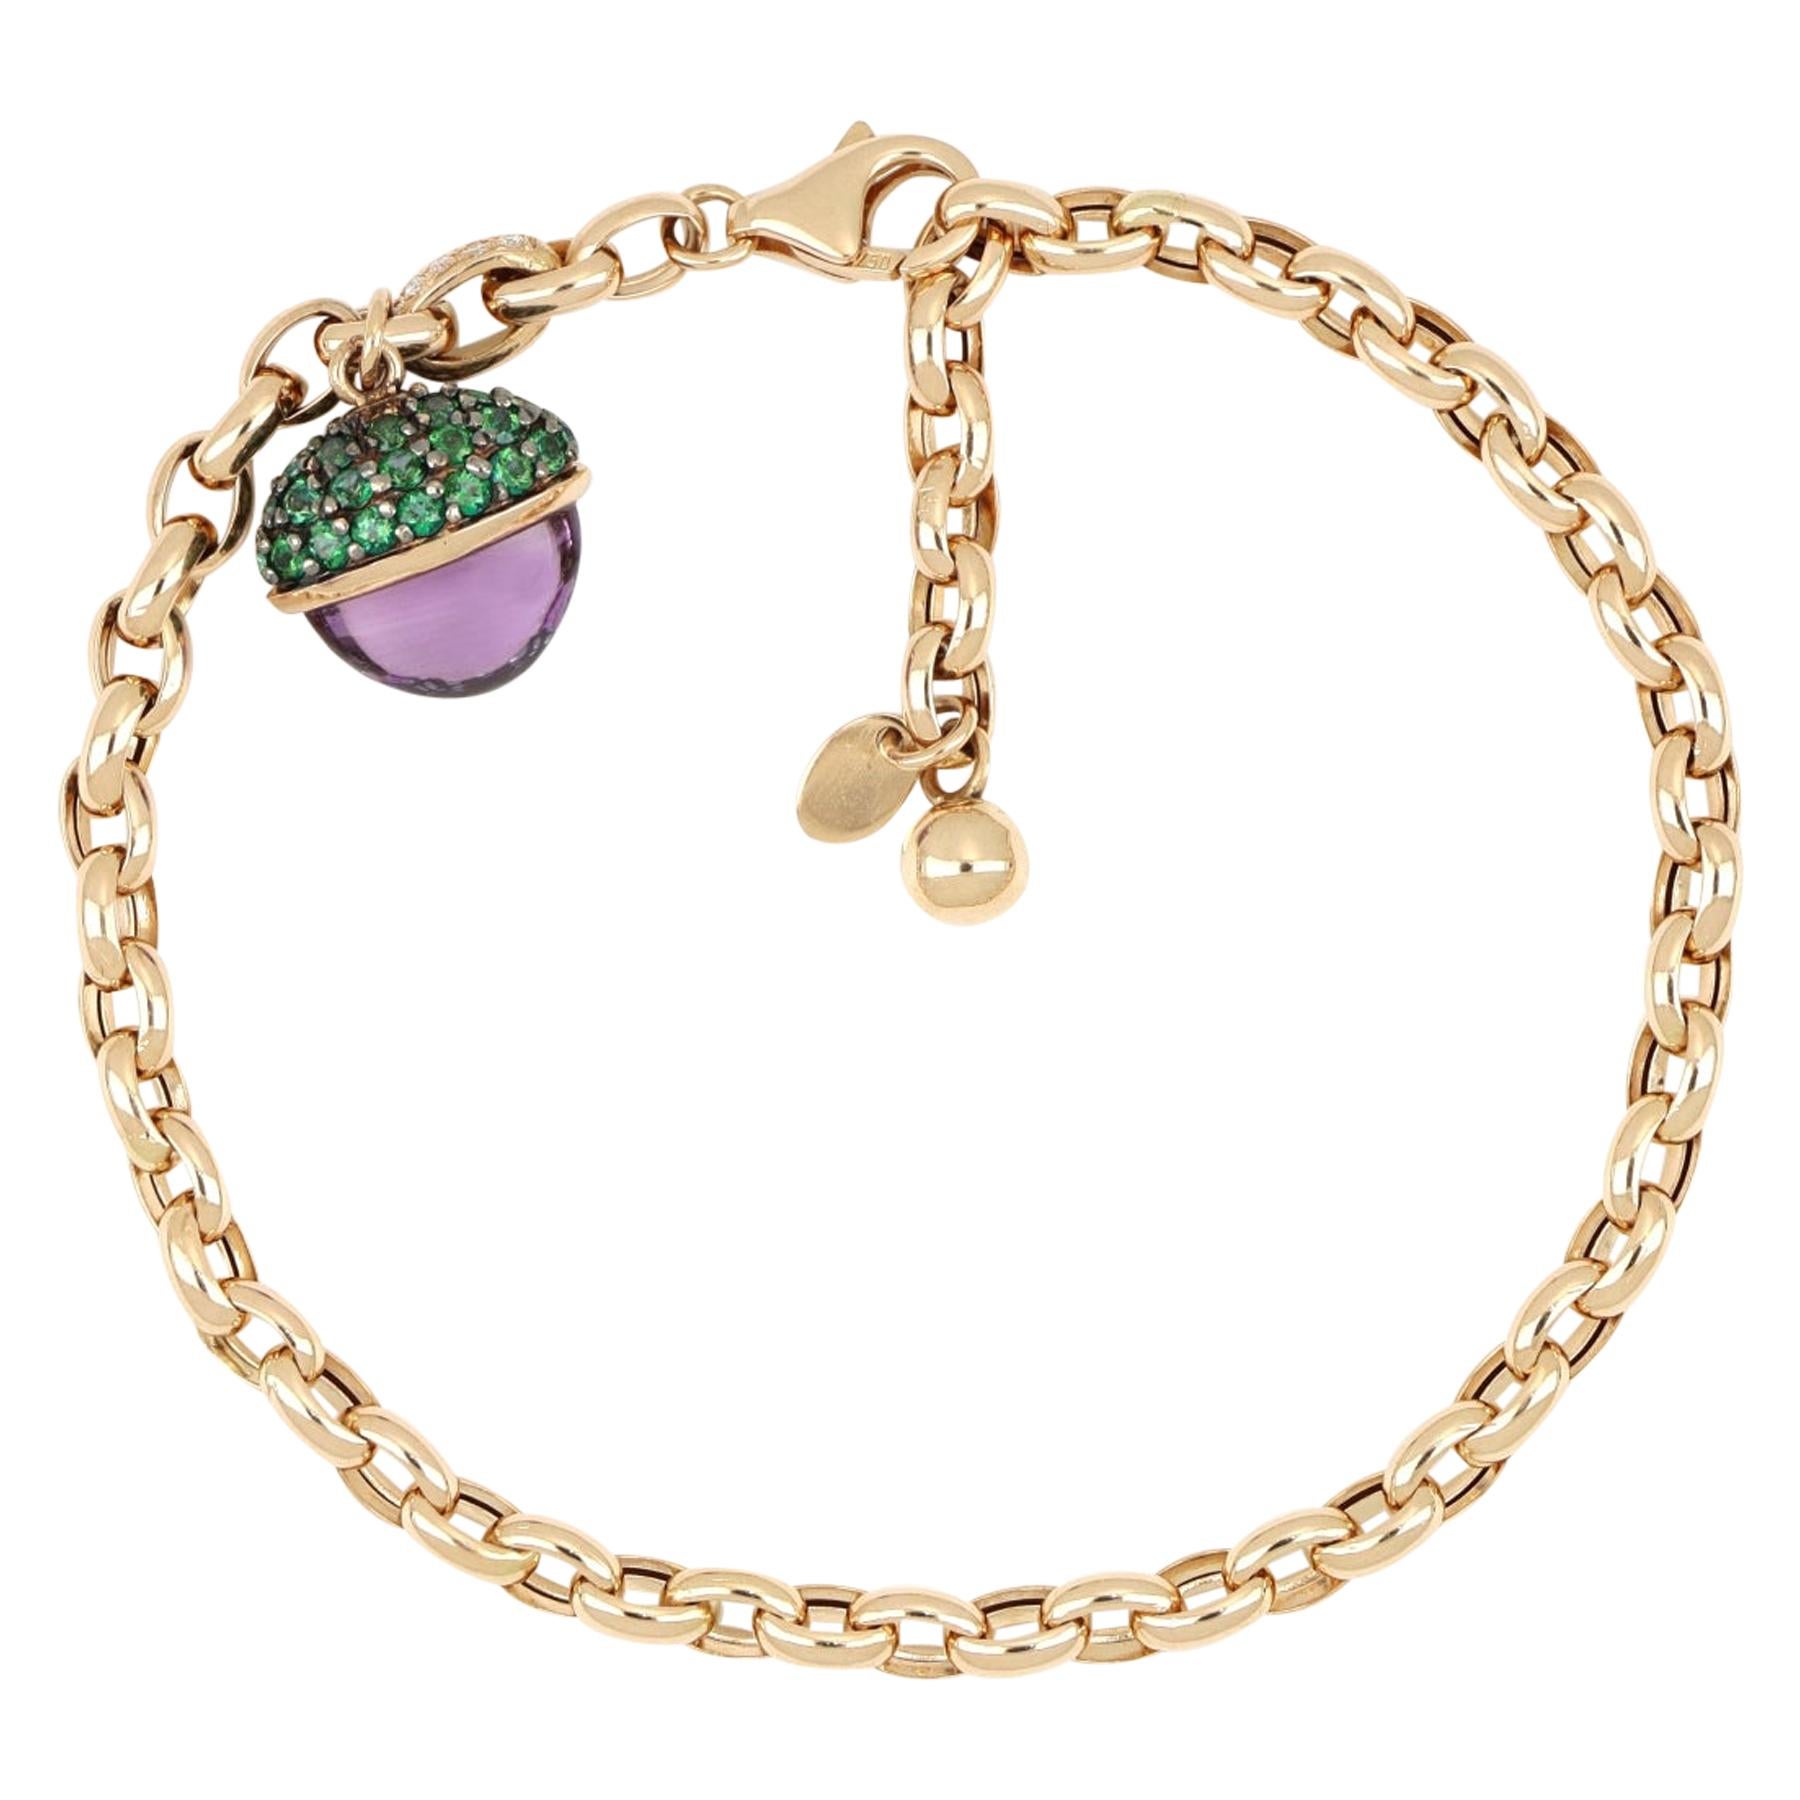 18kt Rose Gold Les Bois Bracelets with Purple Amethyst and Green Topazes